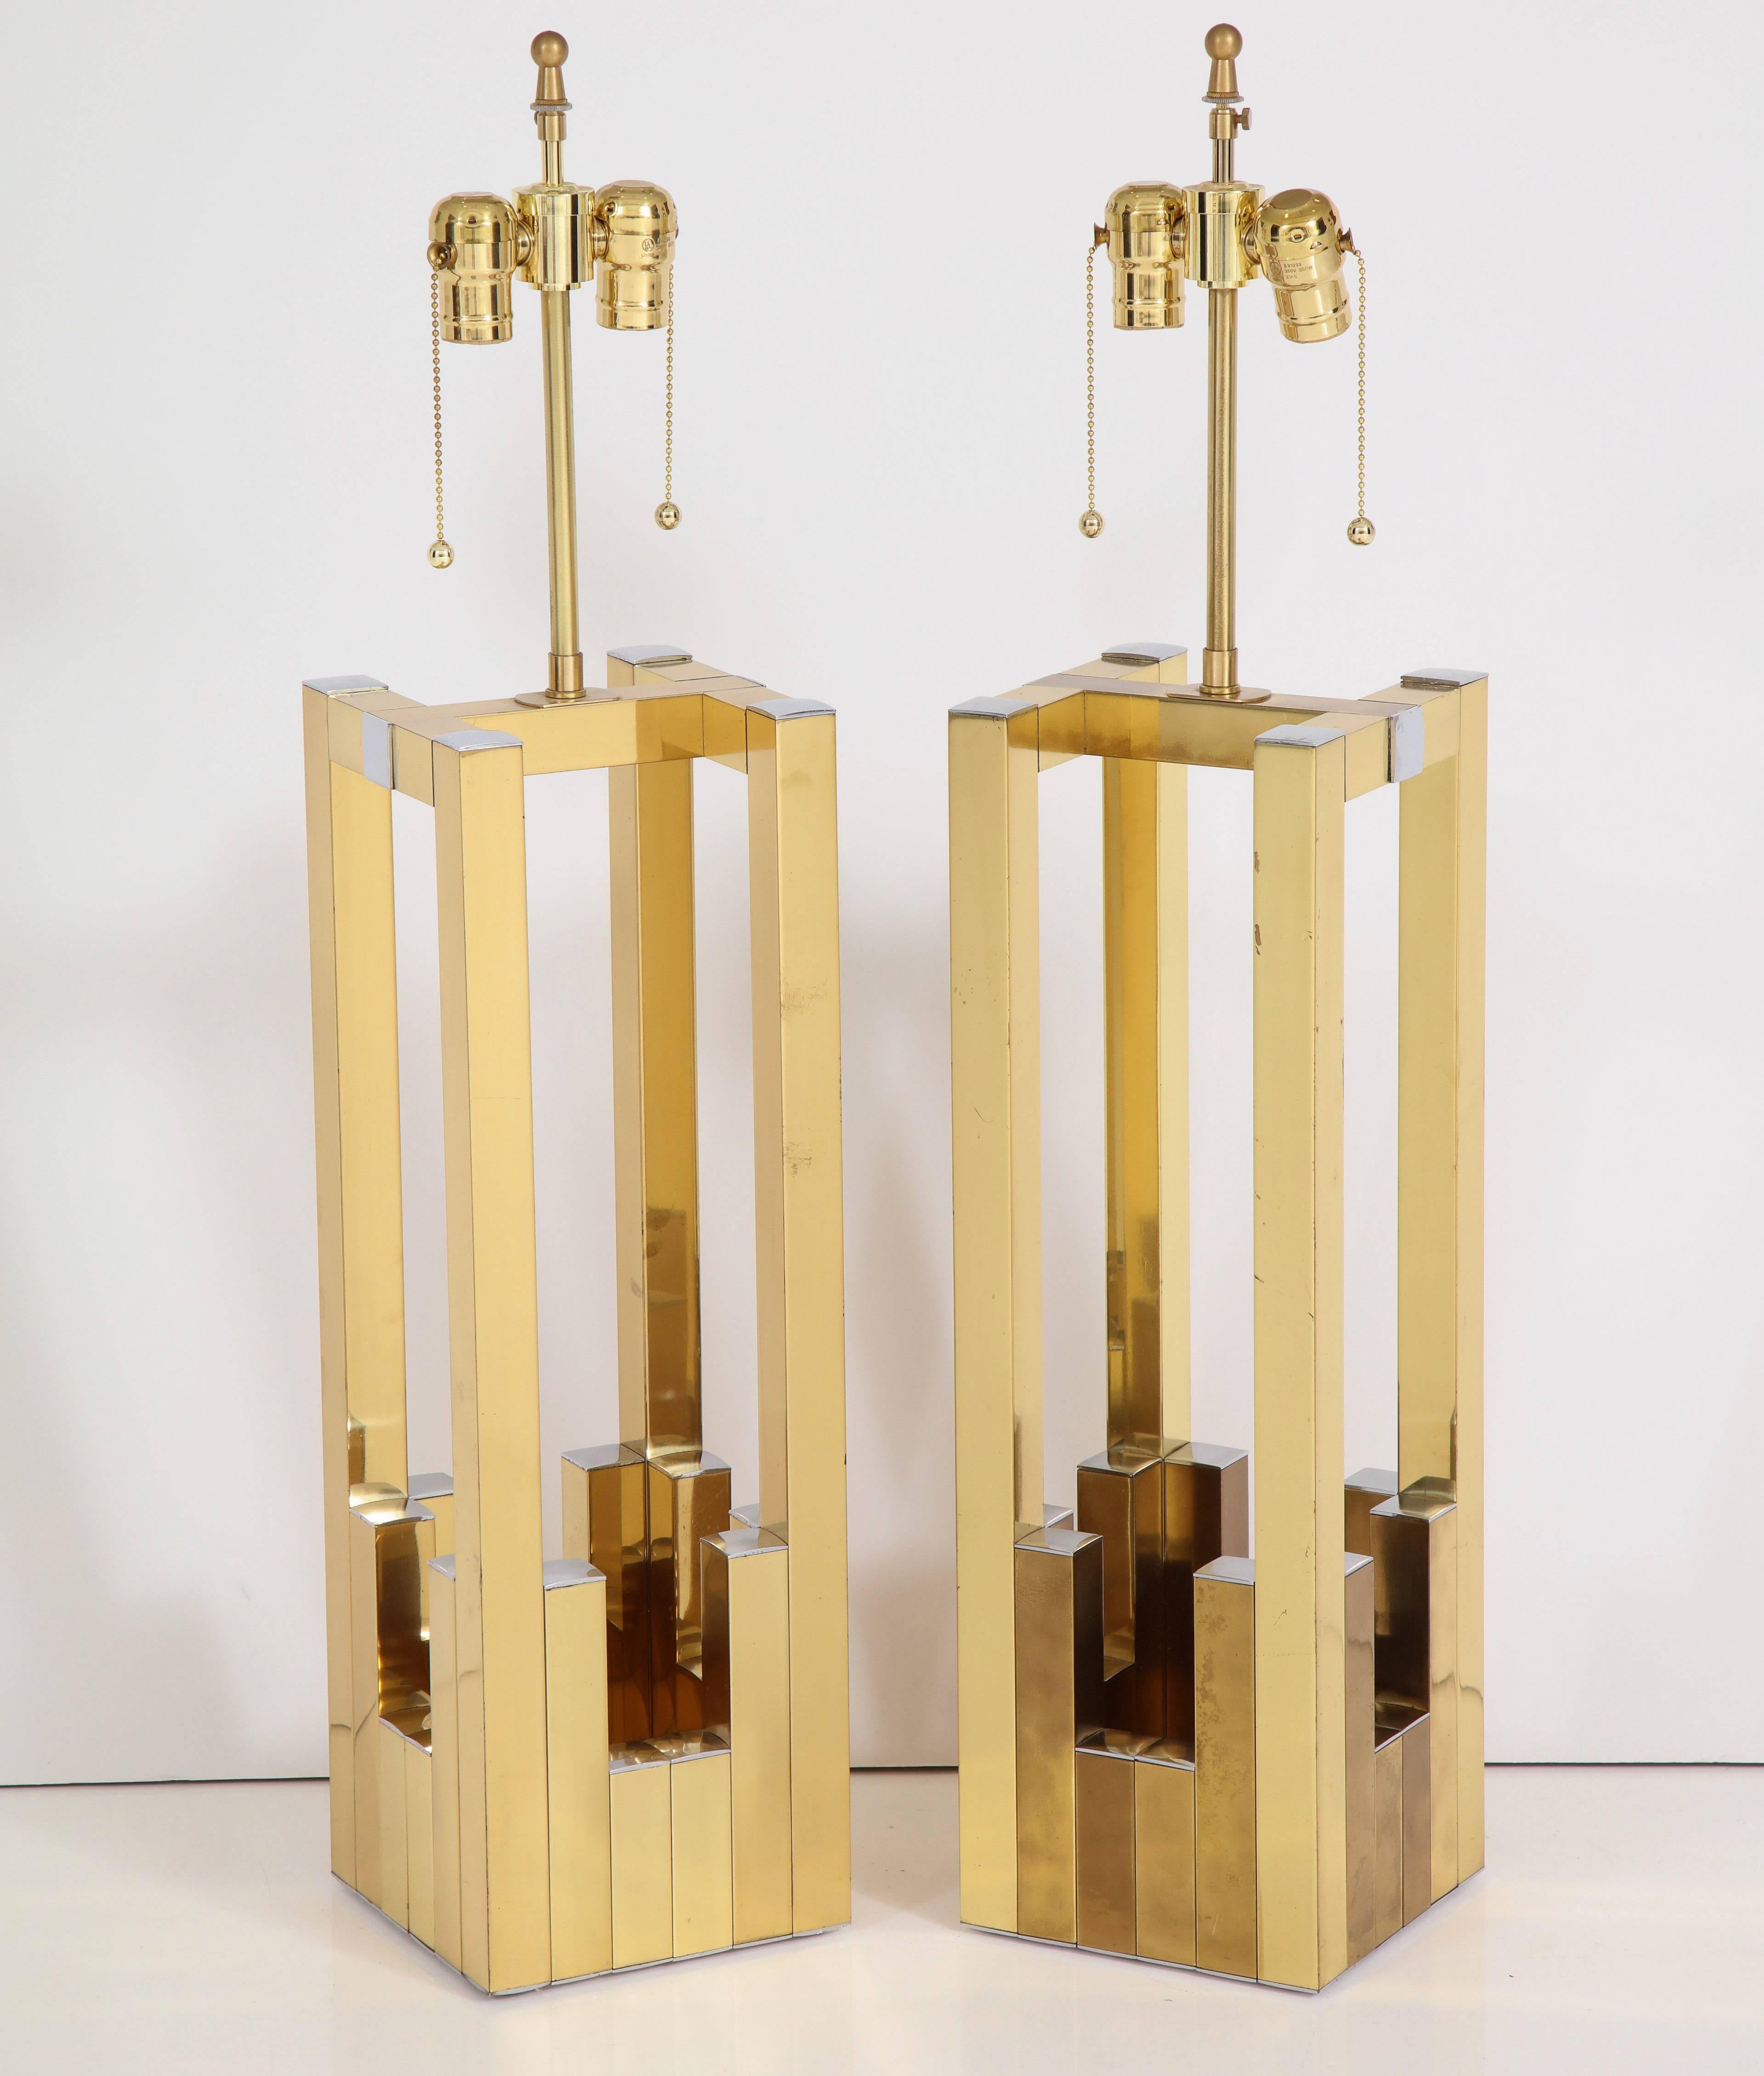 Fabulous pair of extra large table lamps in chrome and brass designed by Willy Rizzo for Lumica. Fabulous sculptural brass lamps with chrome tips are a unique 1970s design reflective of Rizzo's Italian genius. Signed Lumica with original sticker.